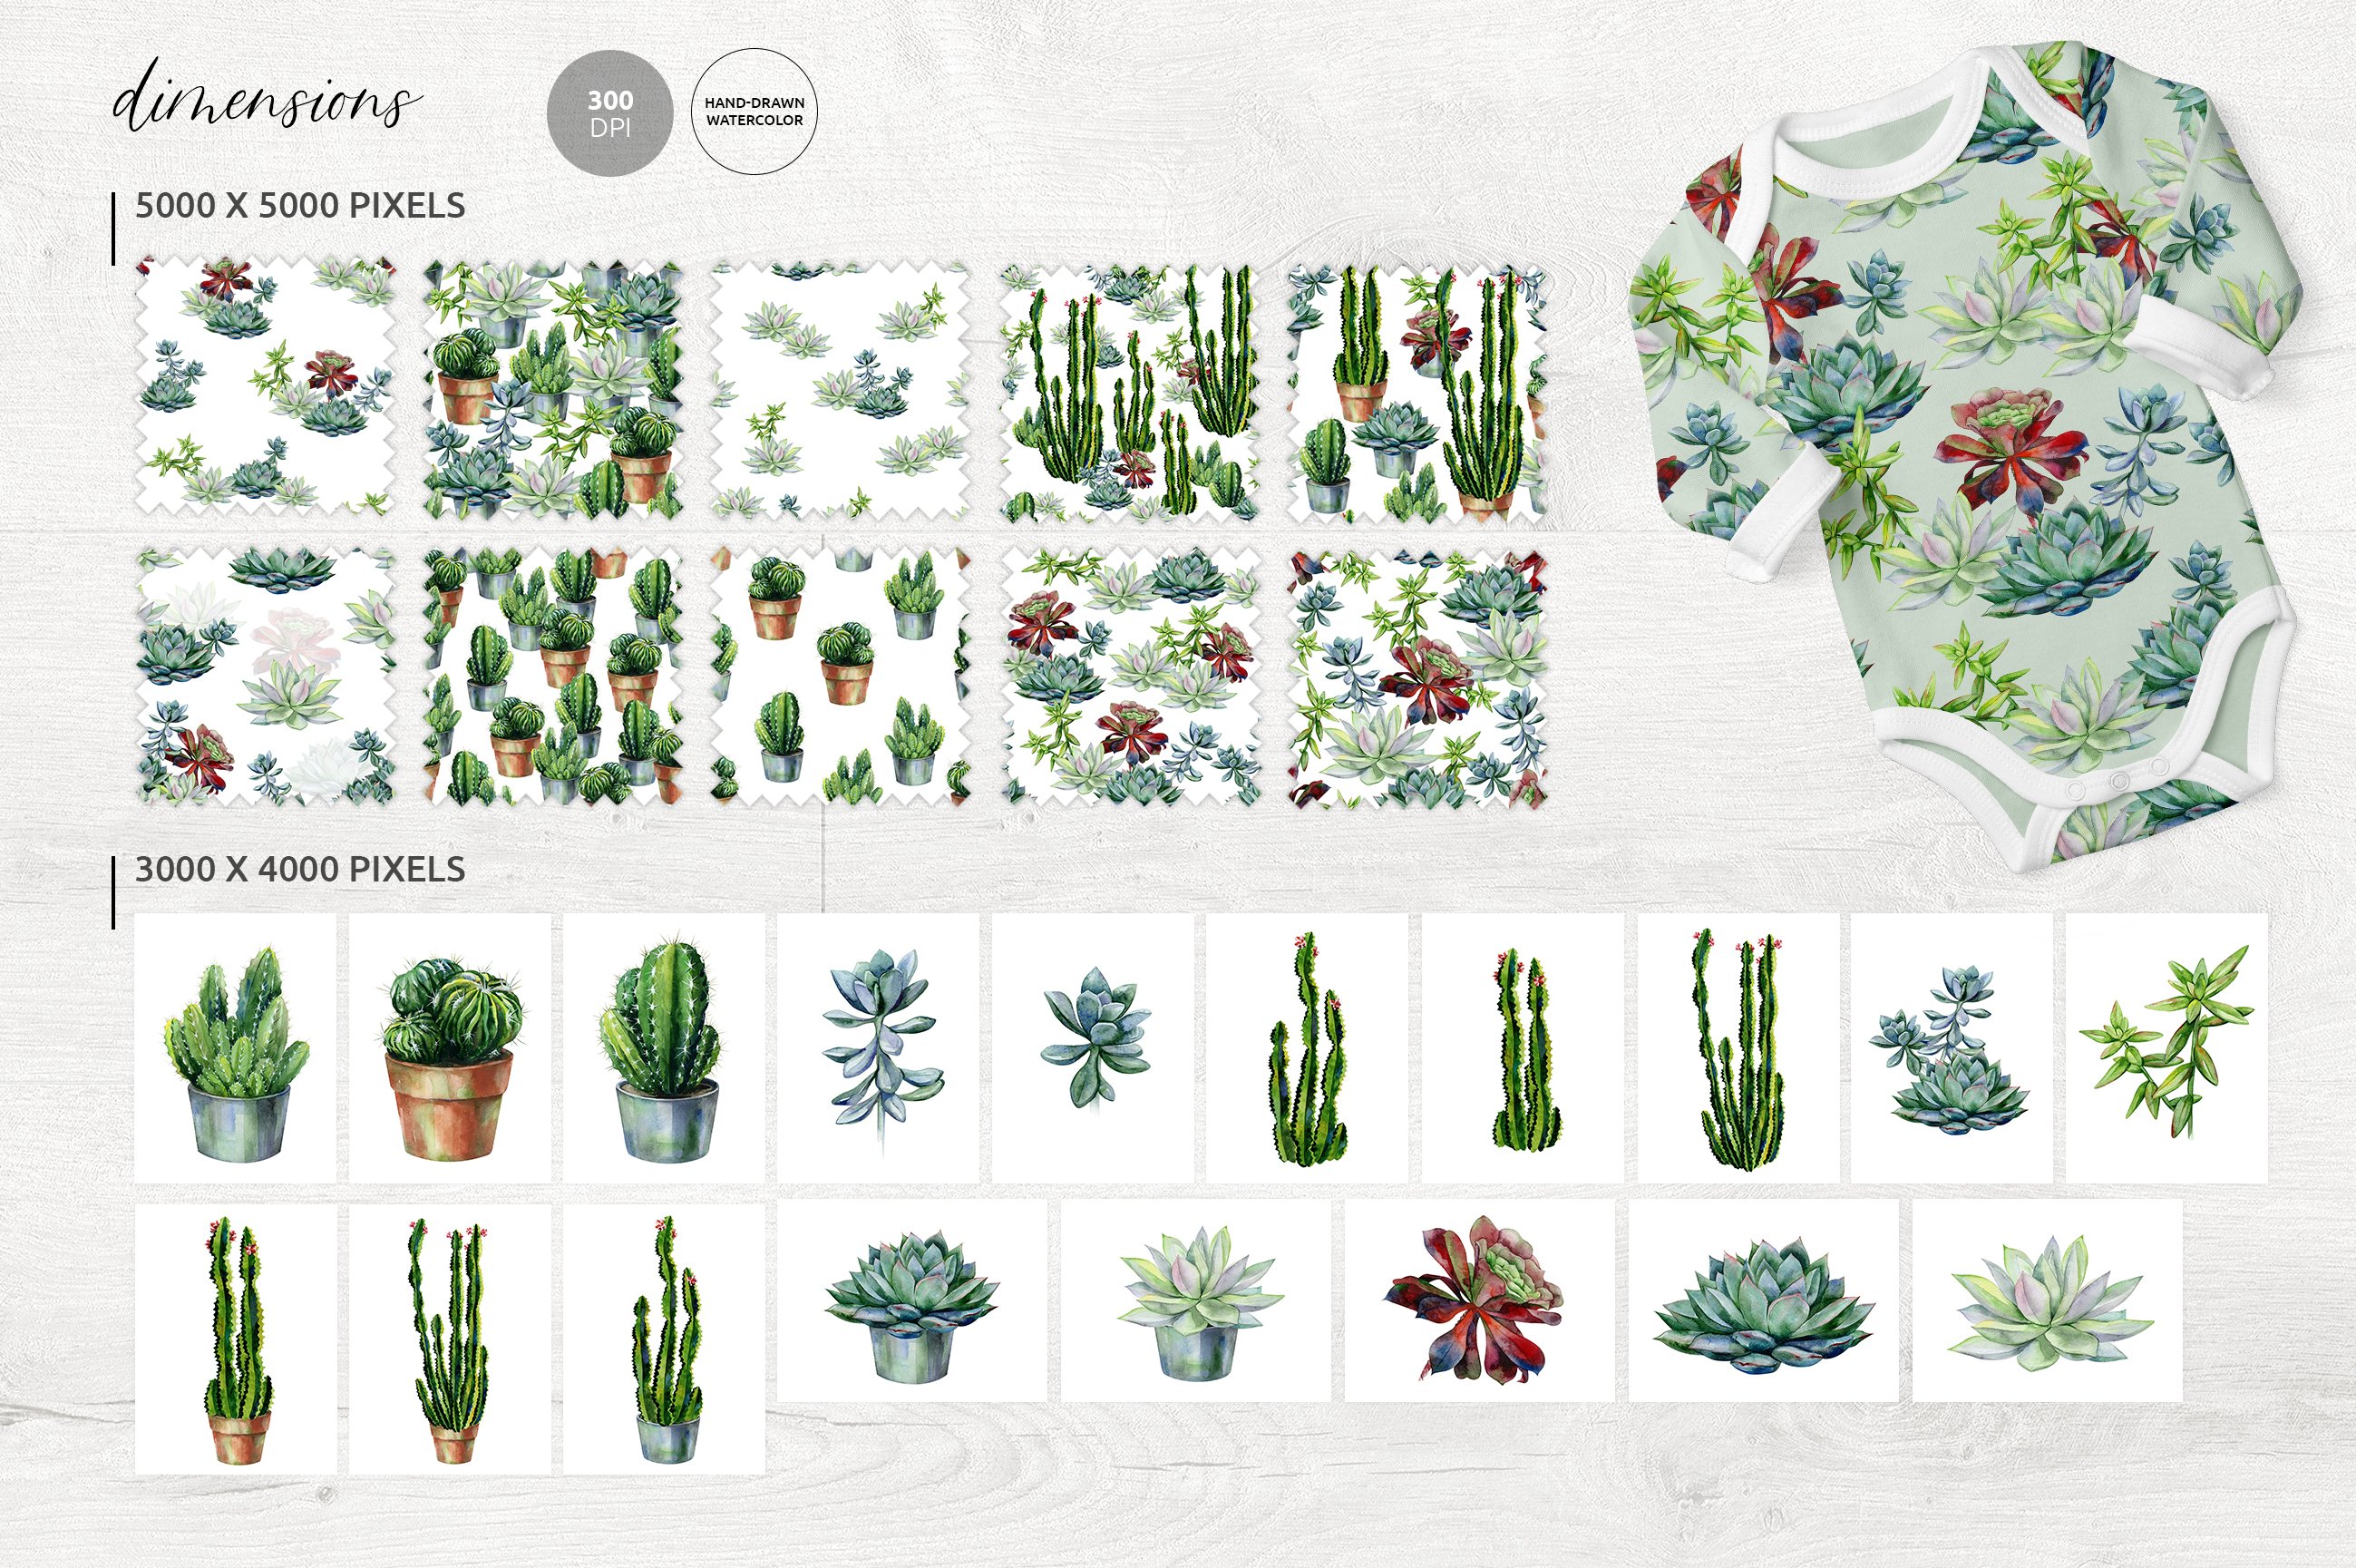 Bunch of cactus plants and succulents on a white background.